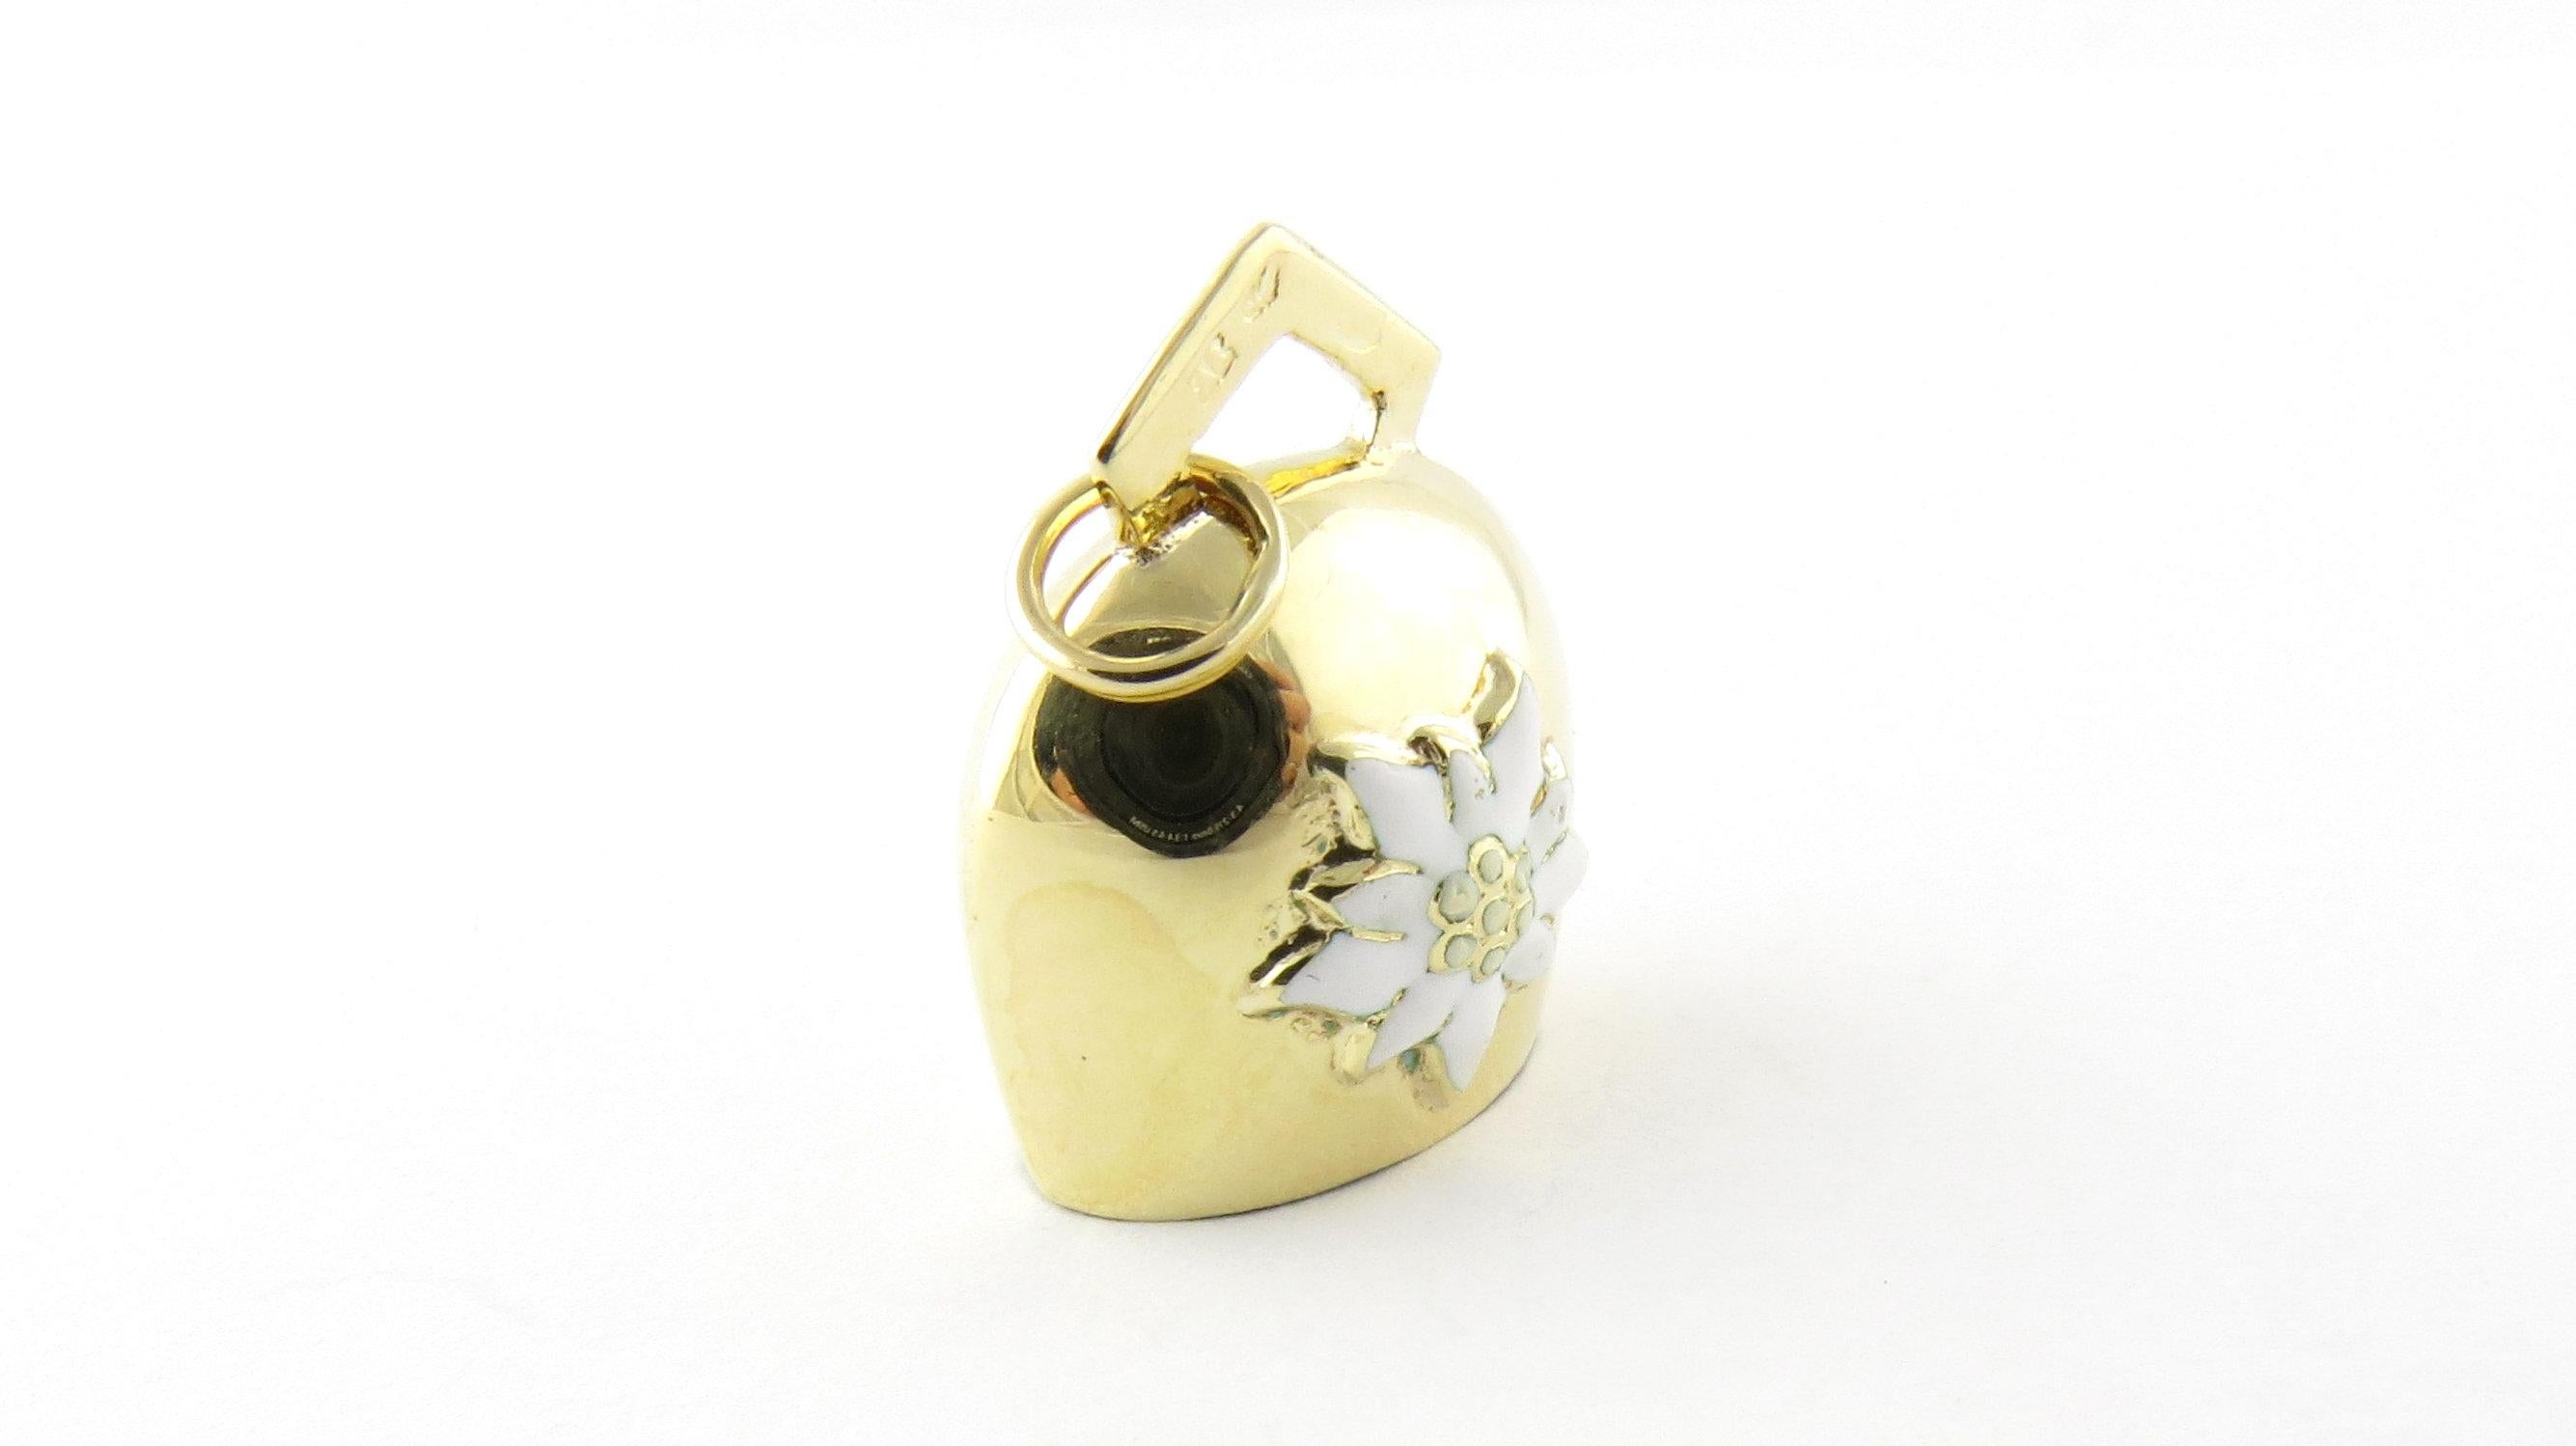 Vintage Mechanical 14 Karat Yellow Gold Bell with Edelweiss Flower Charm- 
This 3D charm features a miniature ringing bell detailed with a lovely enamel edelweiss flower. Meticulously crafted in 14K yellow gold. 
Size: 20 mm x 17 mm (actual charm)